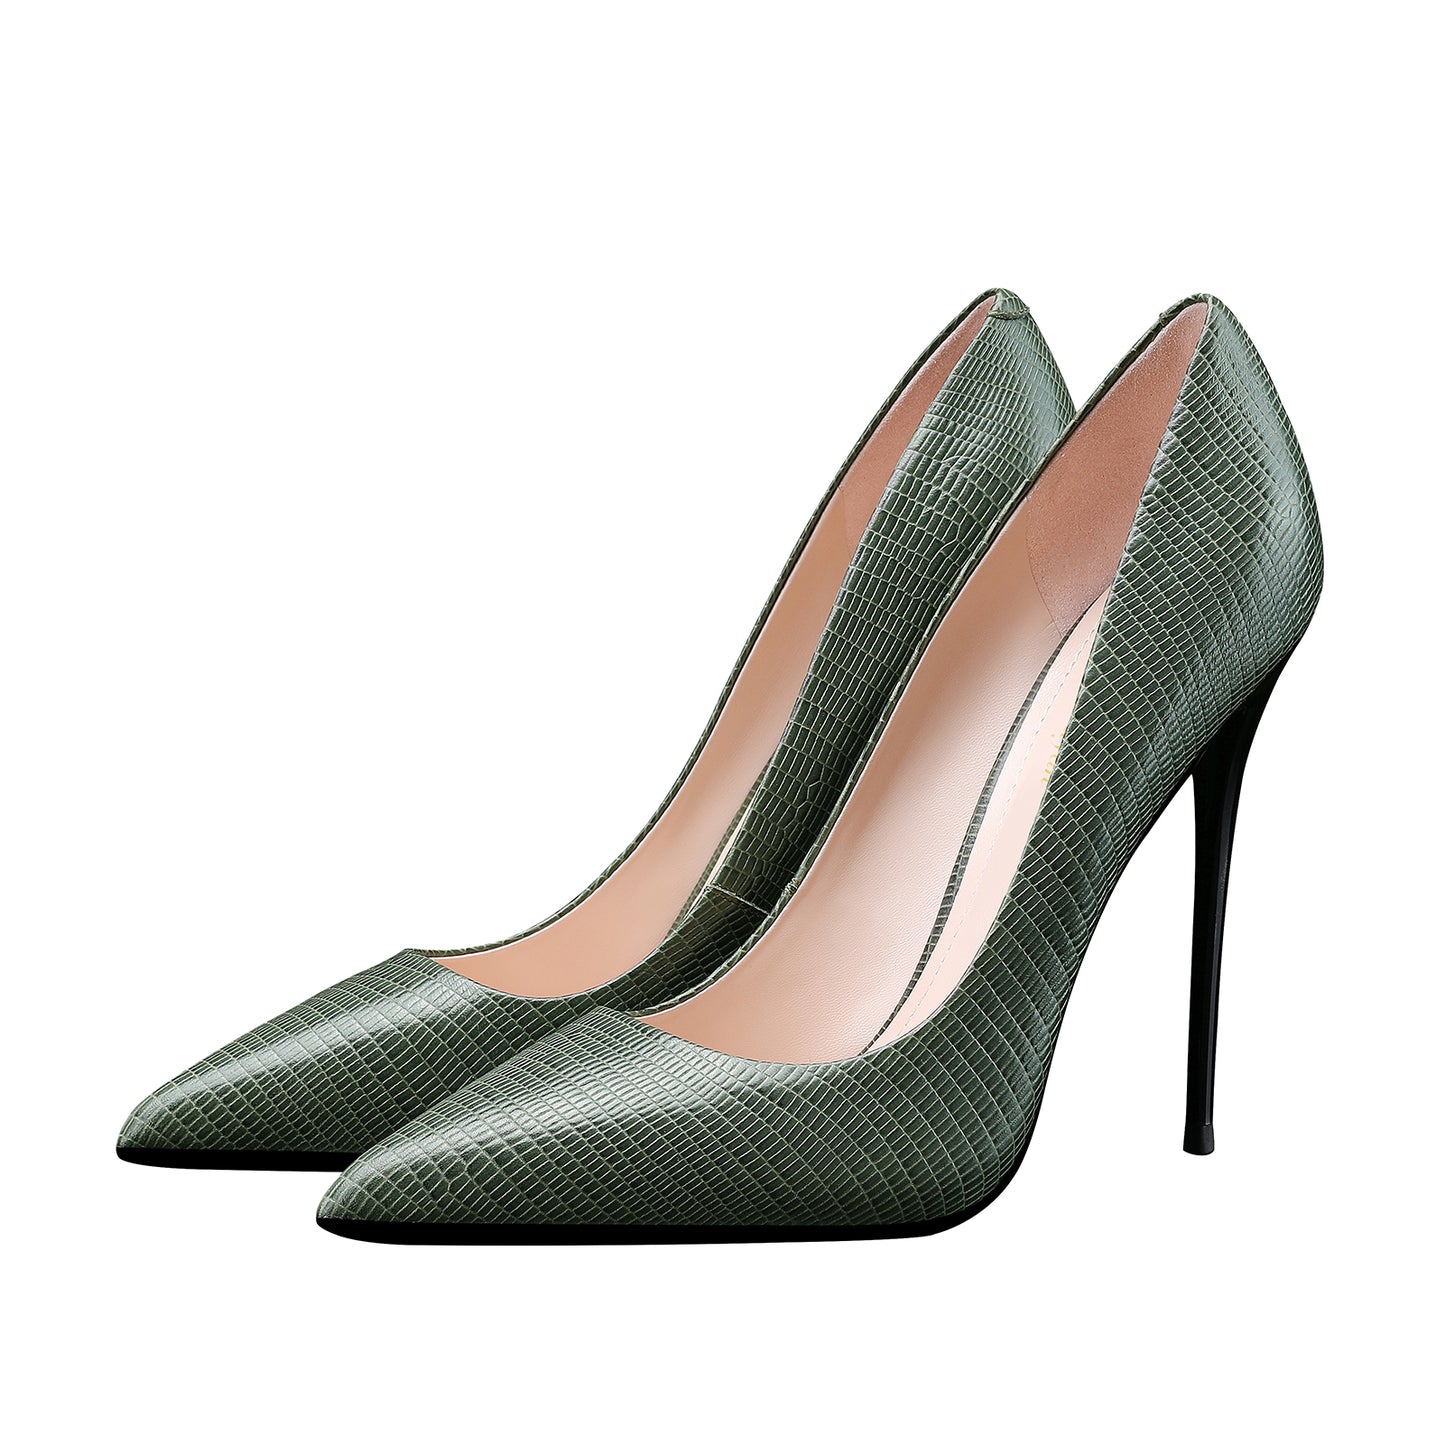 Slip-On Lizard Pattern Leather Featuring Pointed Toe Stiletto Pumps